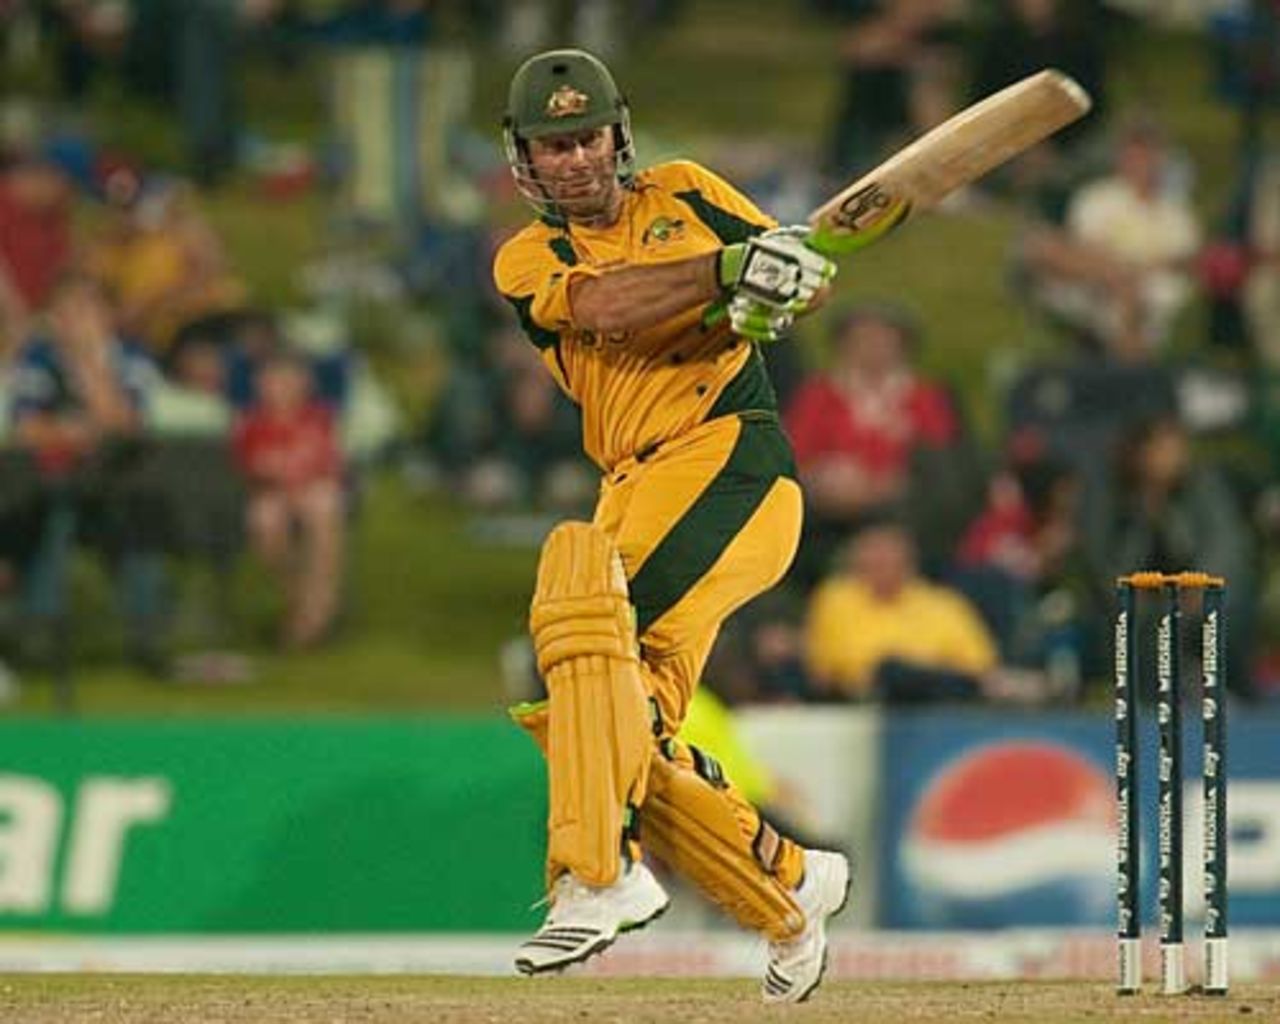 Ricky Ponting was quickly into his stride during Australia's chase, Australia v England, 1st semi-final, Champions Trophy, Centurion Park, October 2, 2009